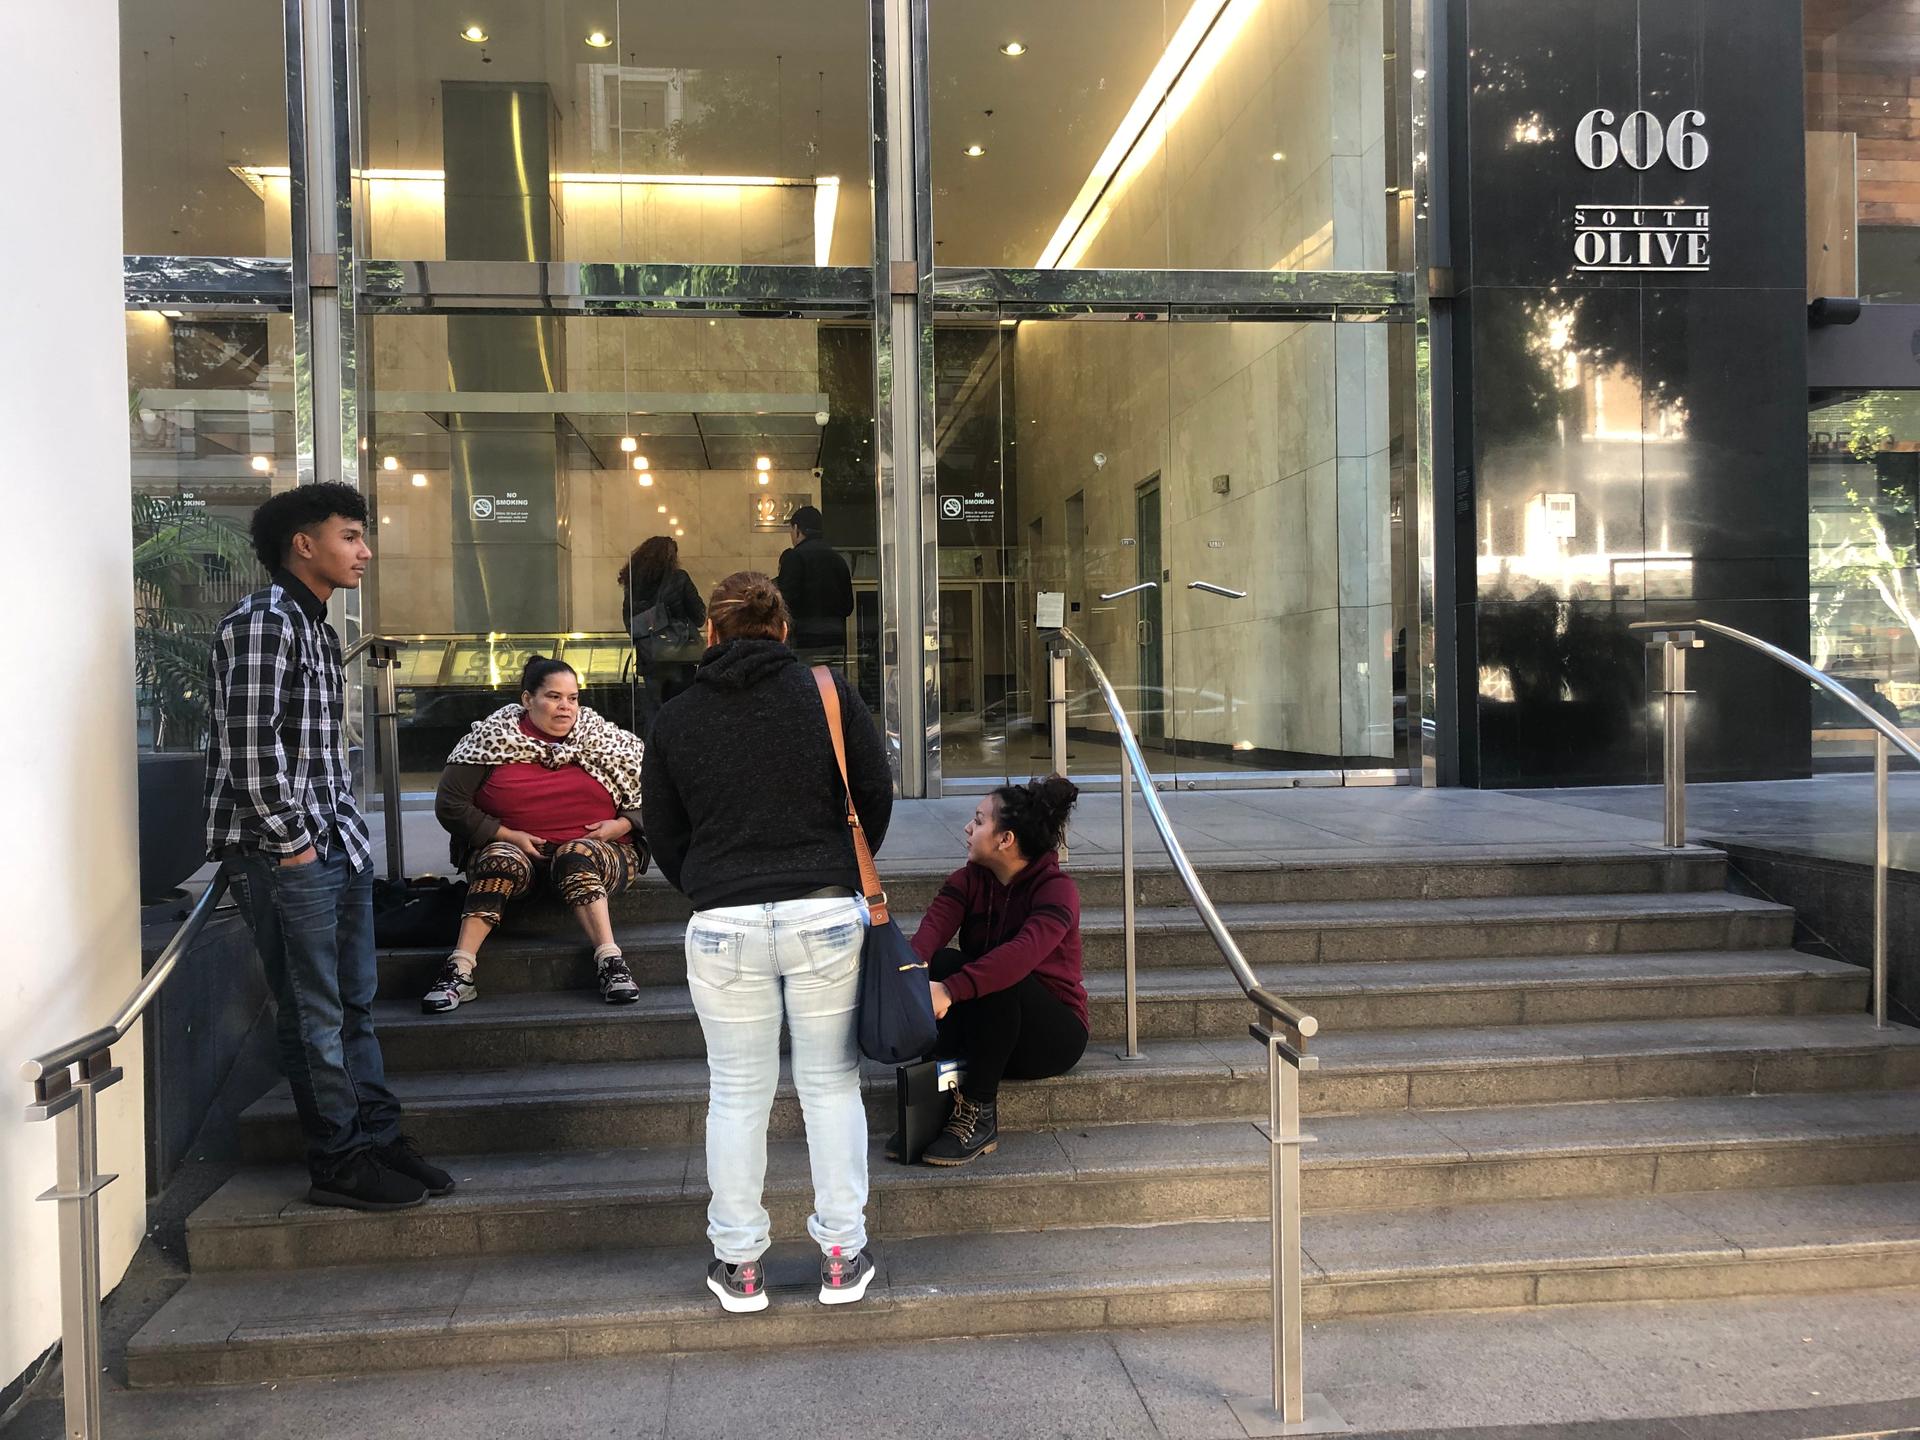 People sit on the steps outside Los Angeles immigration court, which has been closed since Dec. 22 due to a partial government shutdown over funding for a southern border wall. 